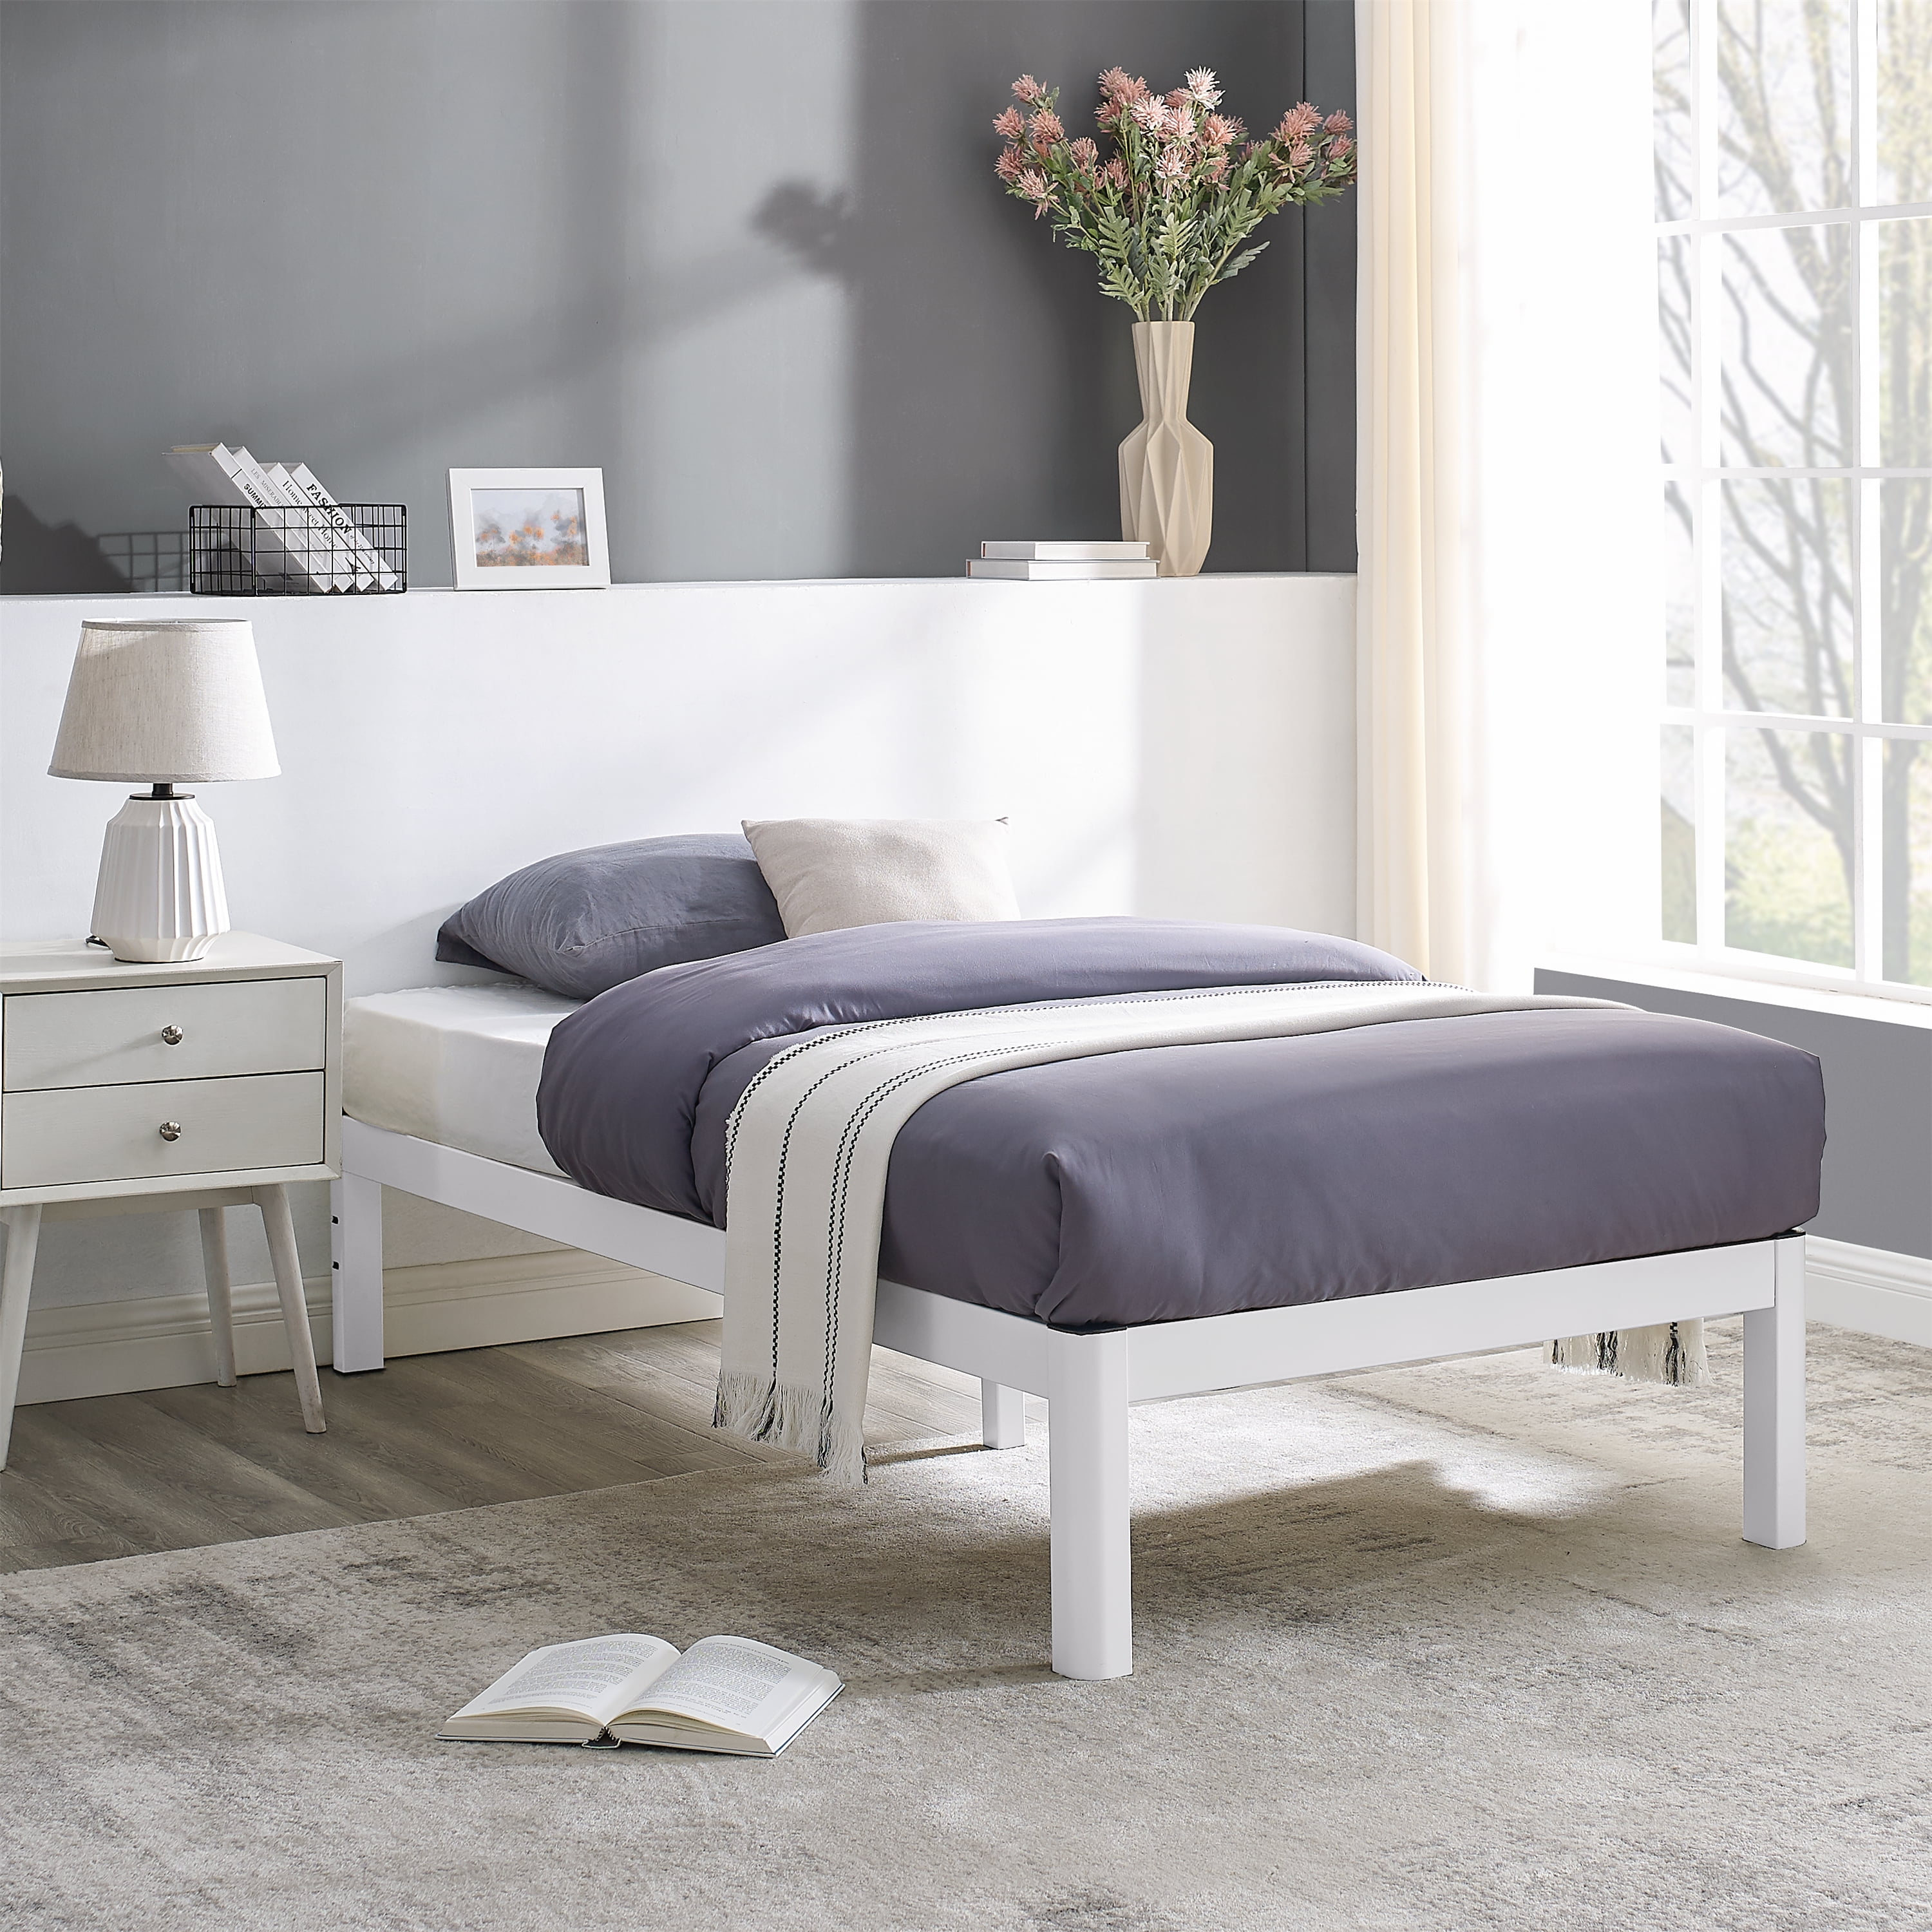 Mainstays Wood Slat White Metal Bed, White And Wood Bed Frame Queen Size